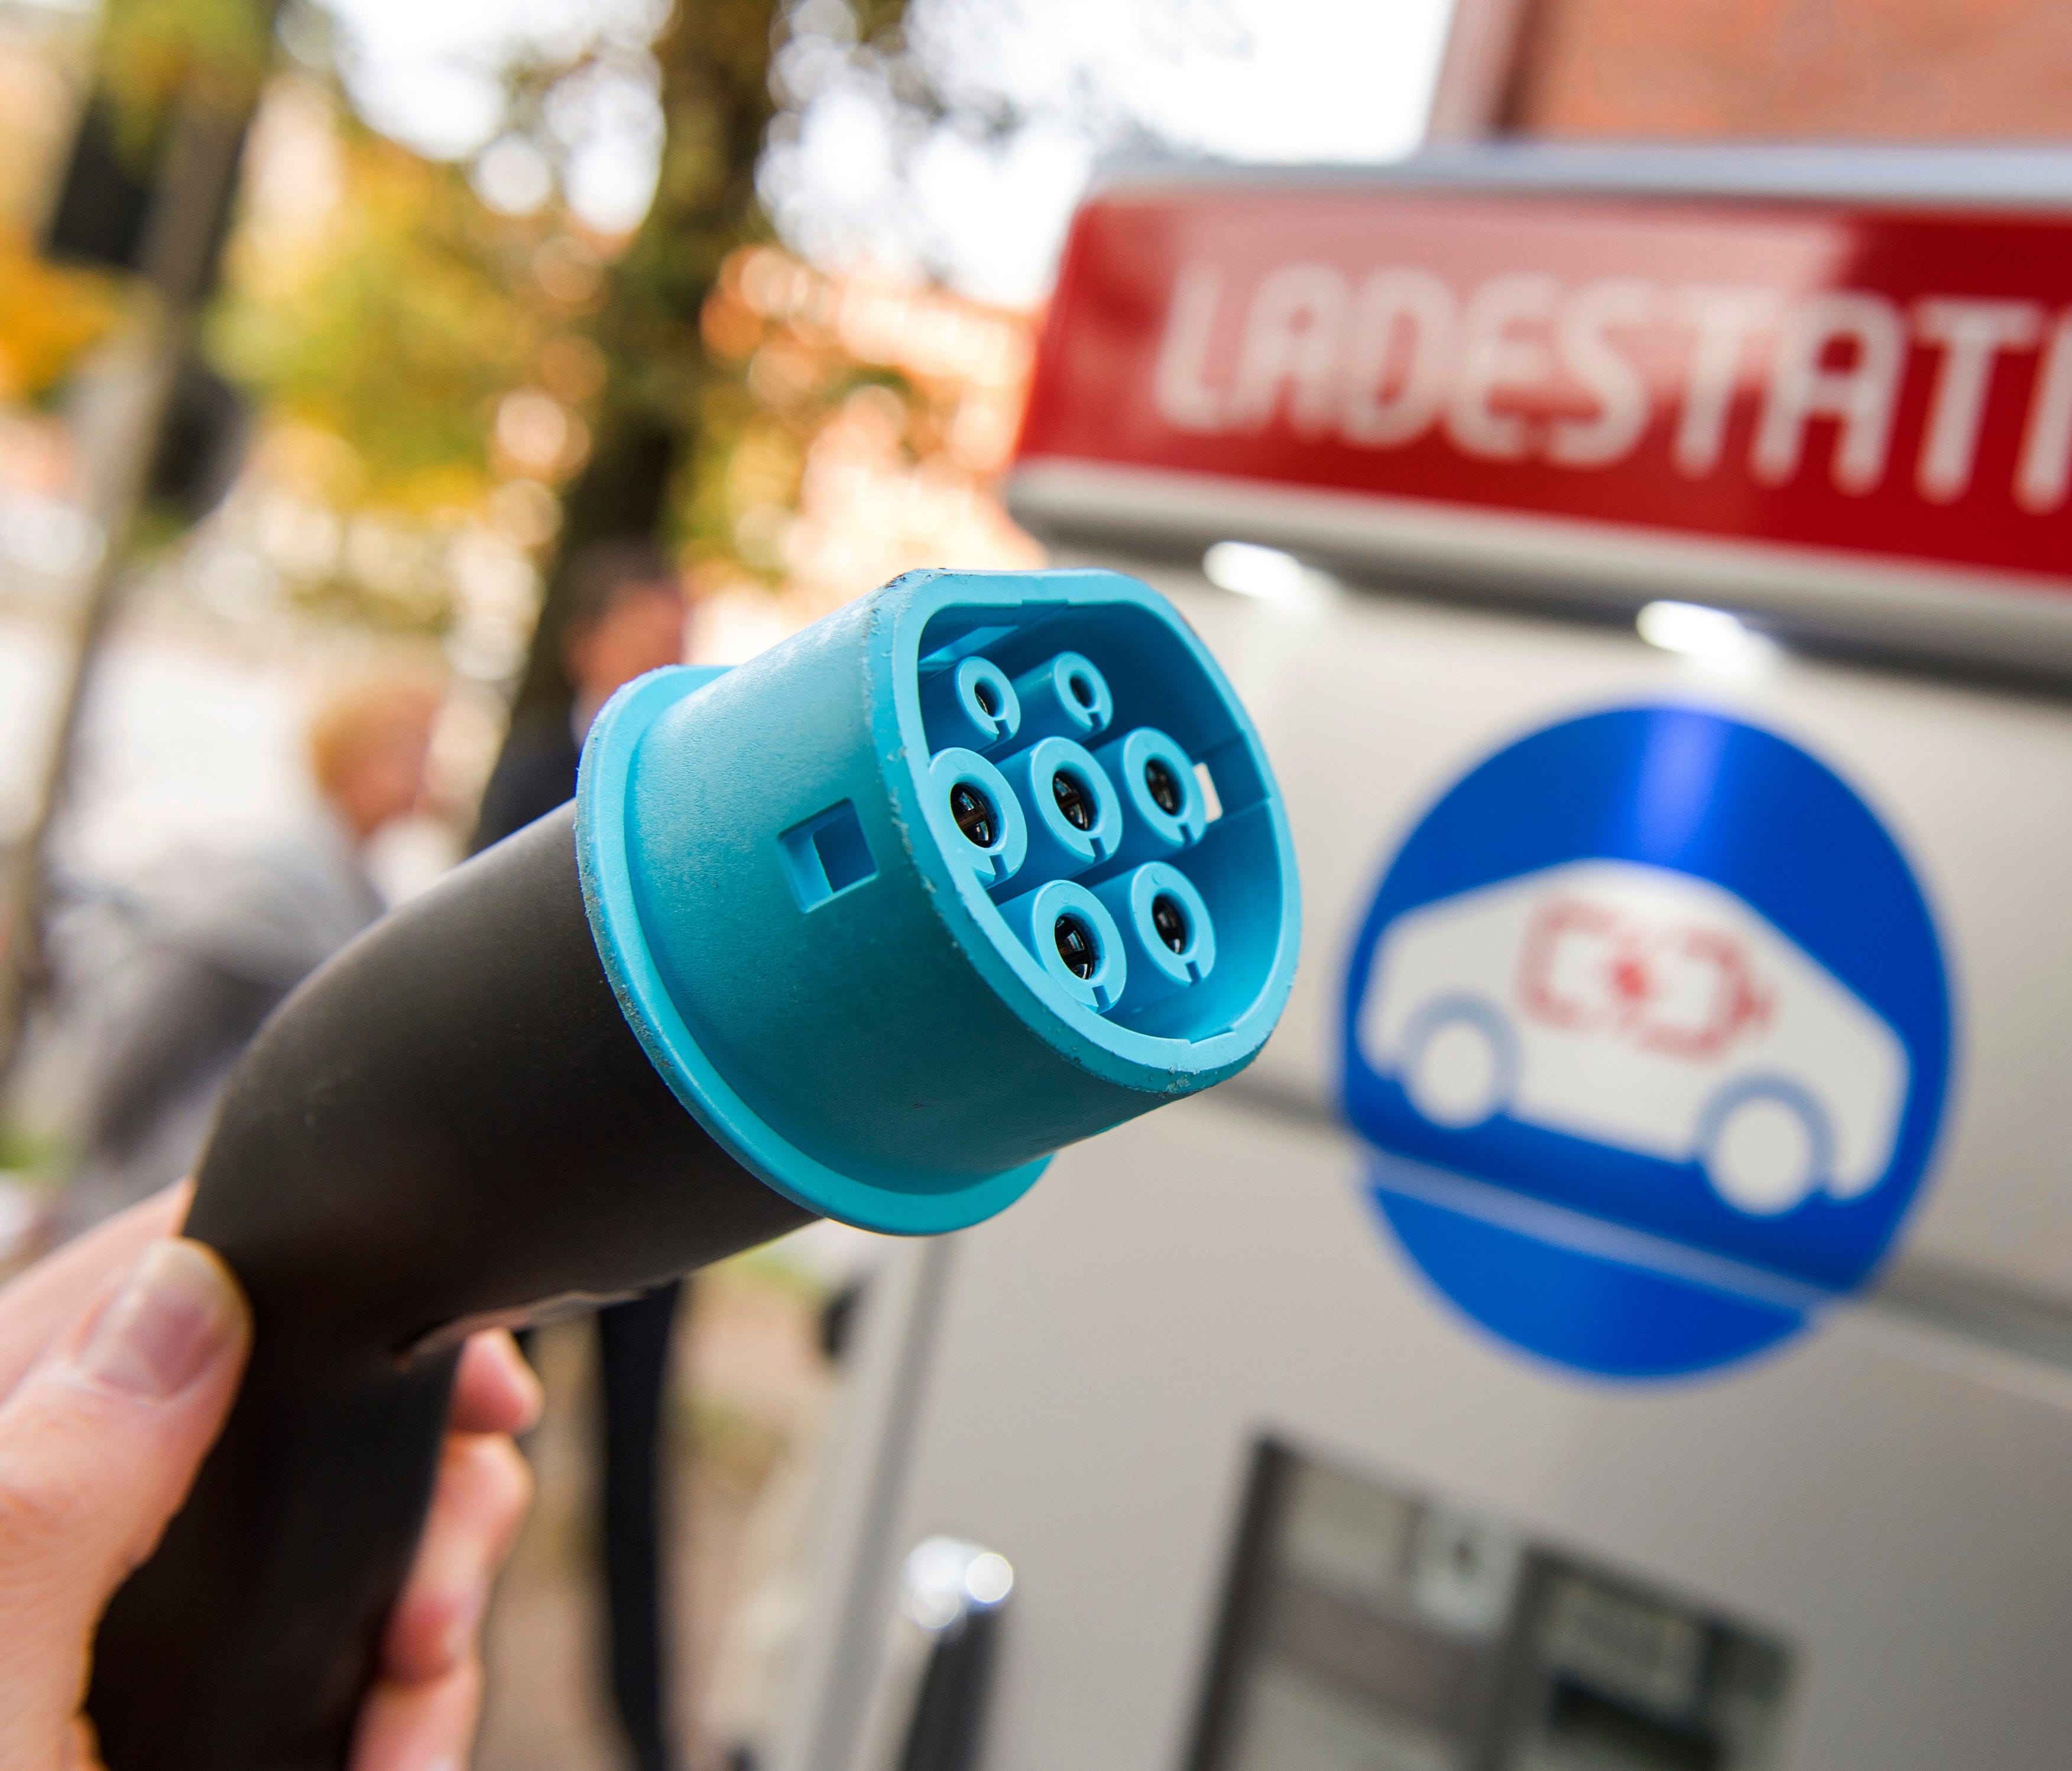 A plug is shown at a charging station for electric vehicles in Hamburg, Germany. Major automakers say their joint European electric car recharging network will open its first stations this year in Germany, Austria and Norway in what the companies hop